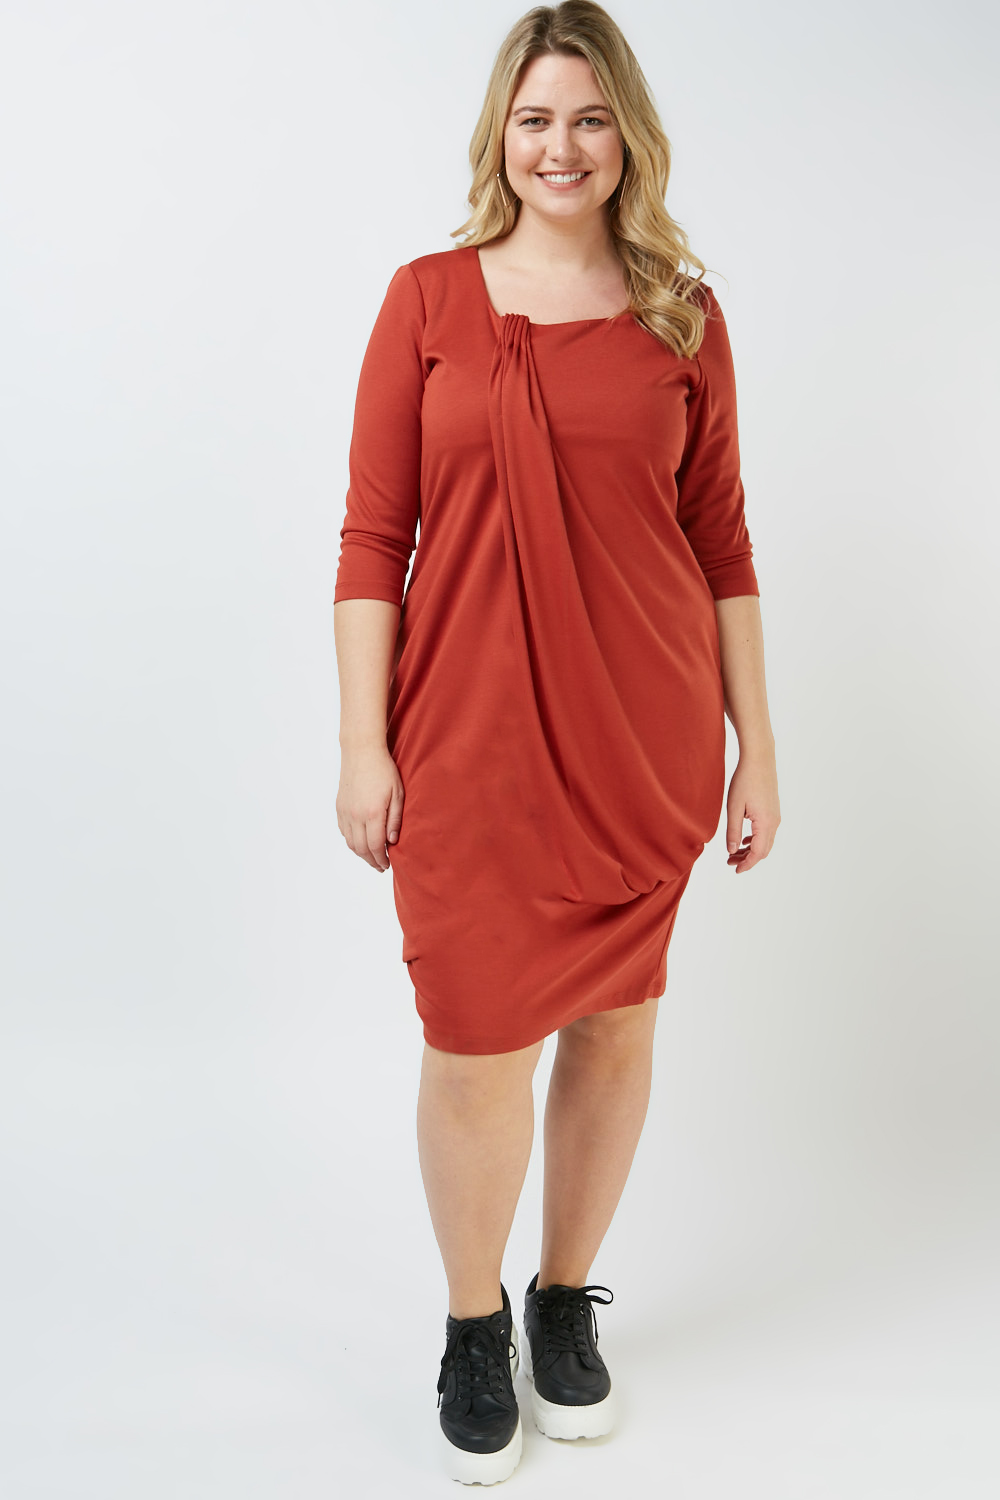 Gathered Front Panel Dress - Just $7